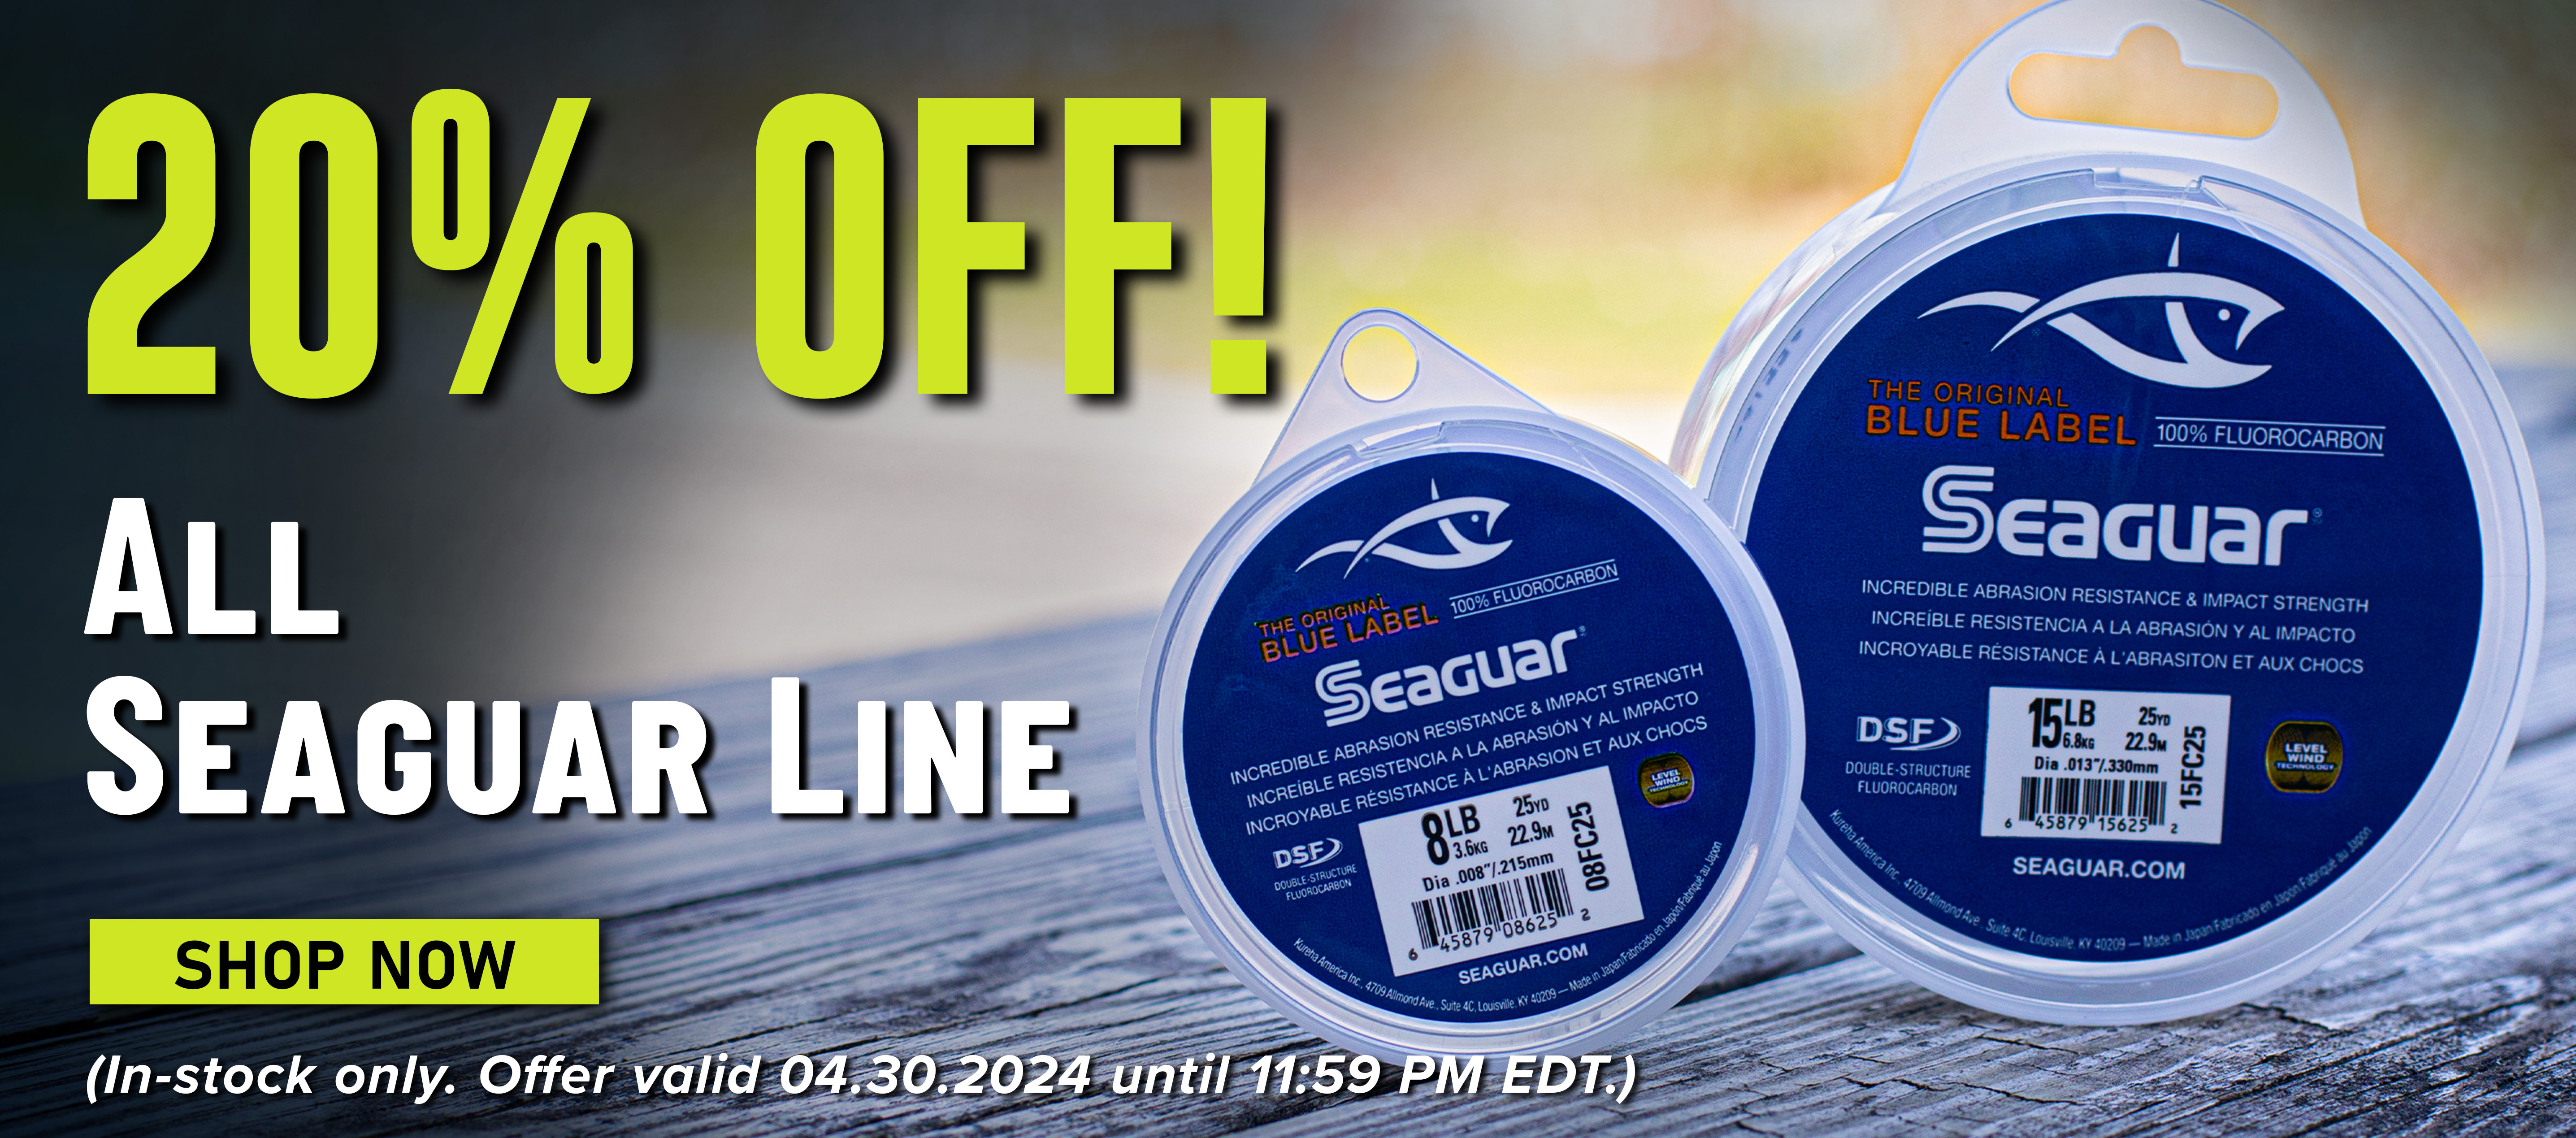 20% Off! All Seaguar Line Shop Now (In-stock only. Offer valid 04.30.2024 until 11:59 PM EDT.)